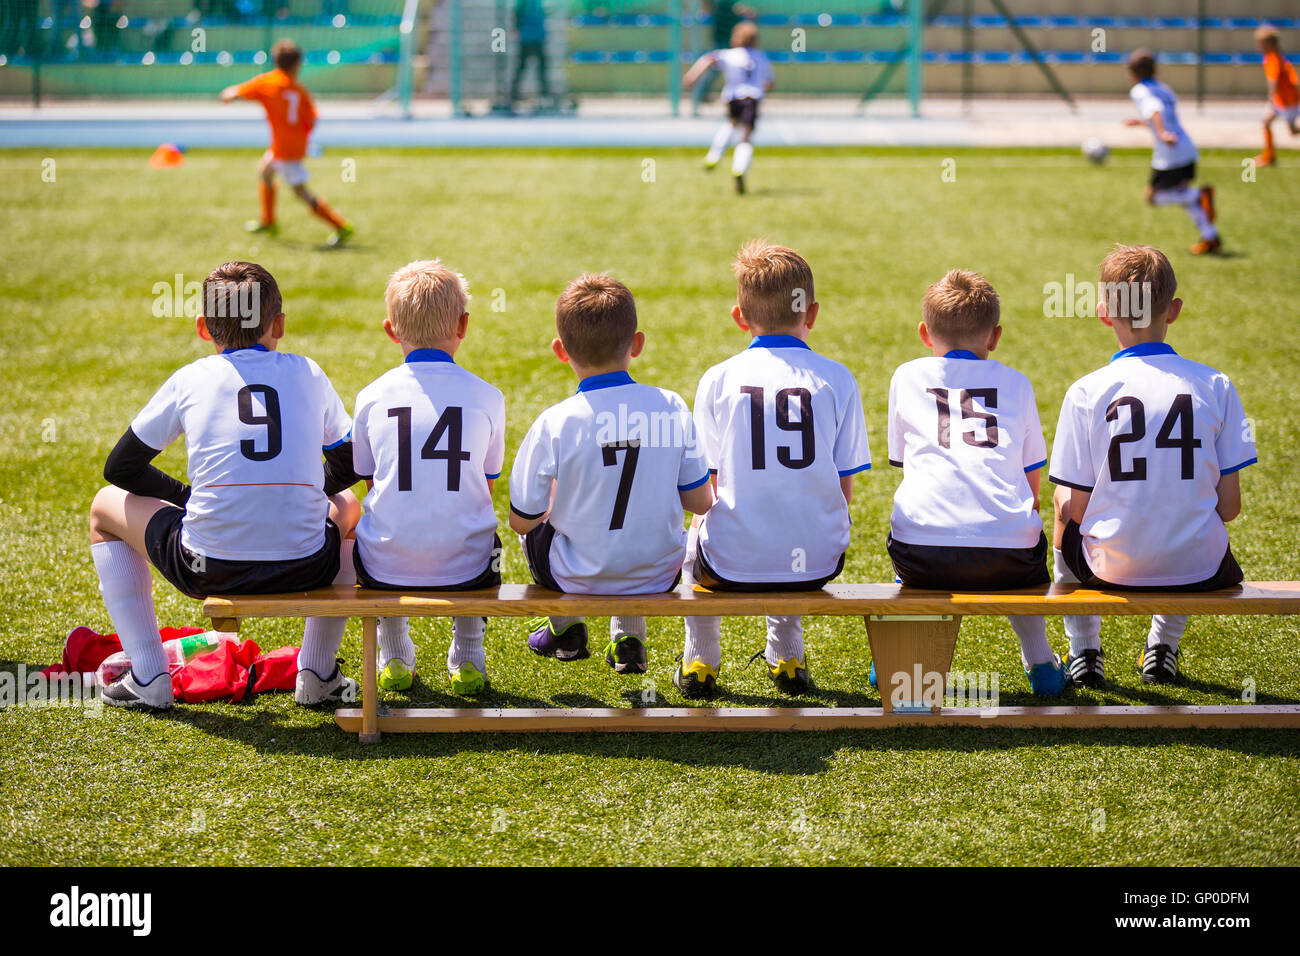 Football soccer match for children. Kids waiting on a bench. Soccer Tournament for youth school teams Stock Photo